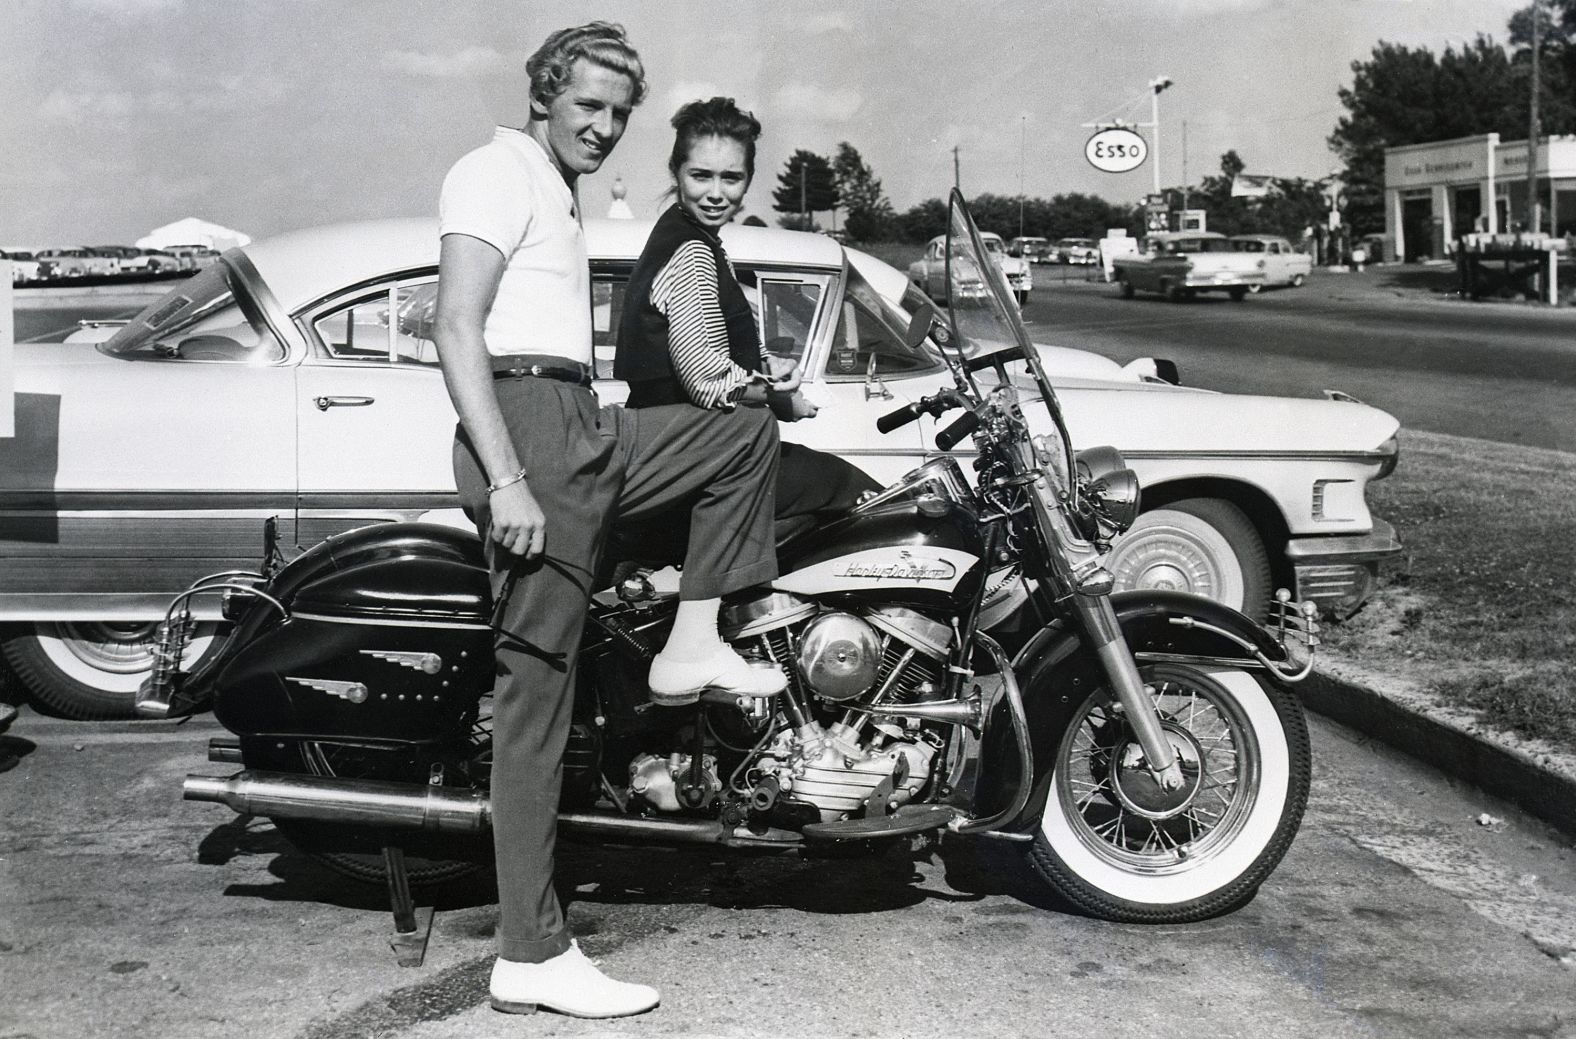 Lewis and Myra get set for a motorcycle ride in 1958.